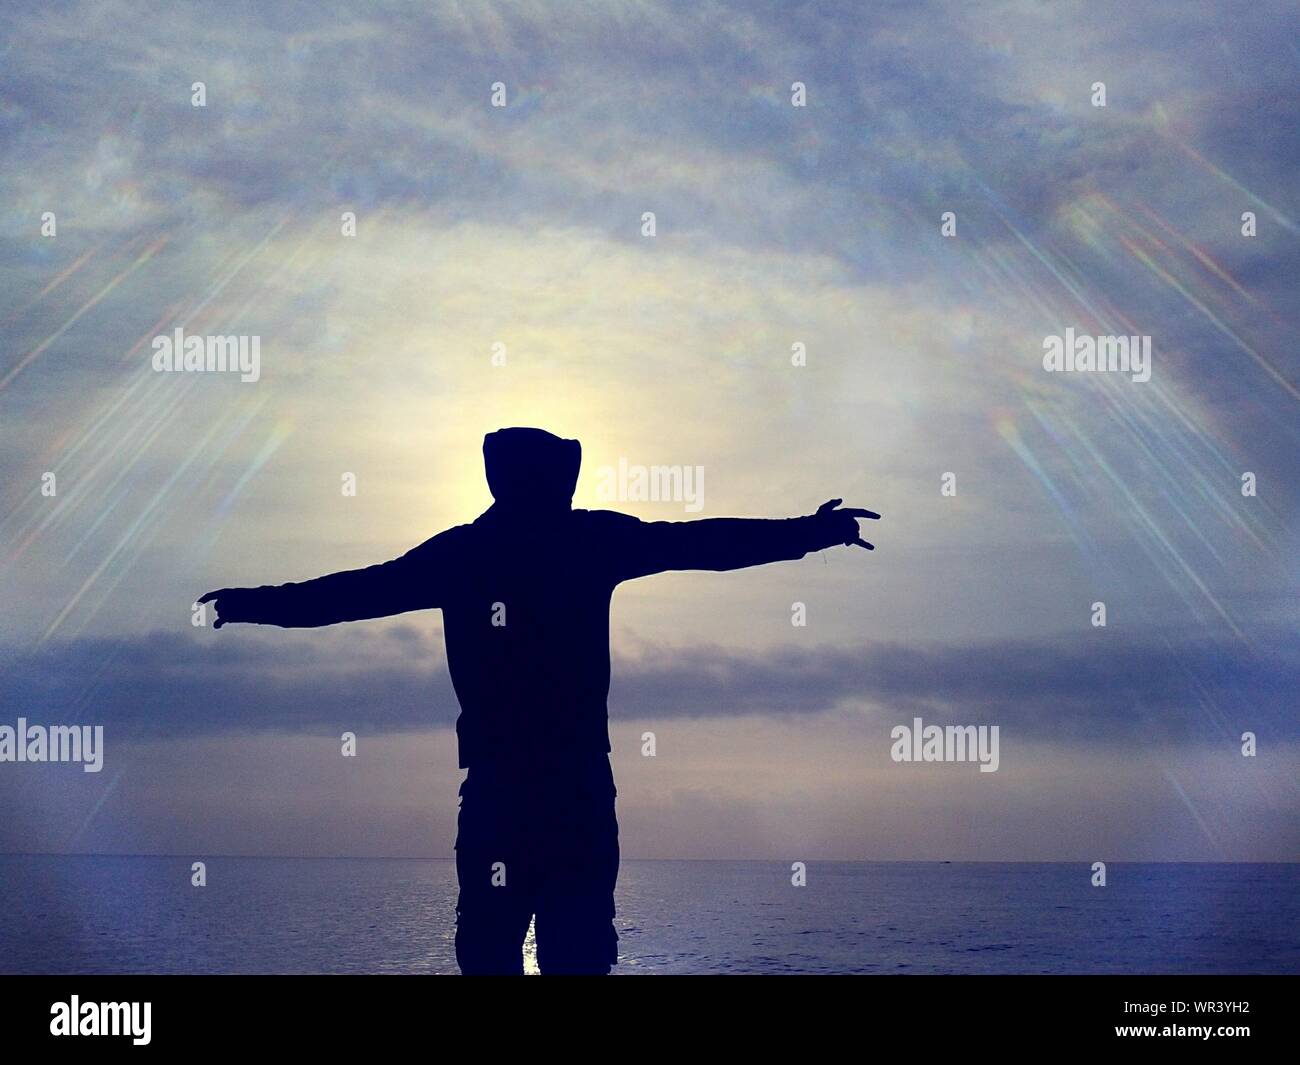 Silhouette Of Man With Outstretched Arms At Beach Stock Photo